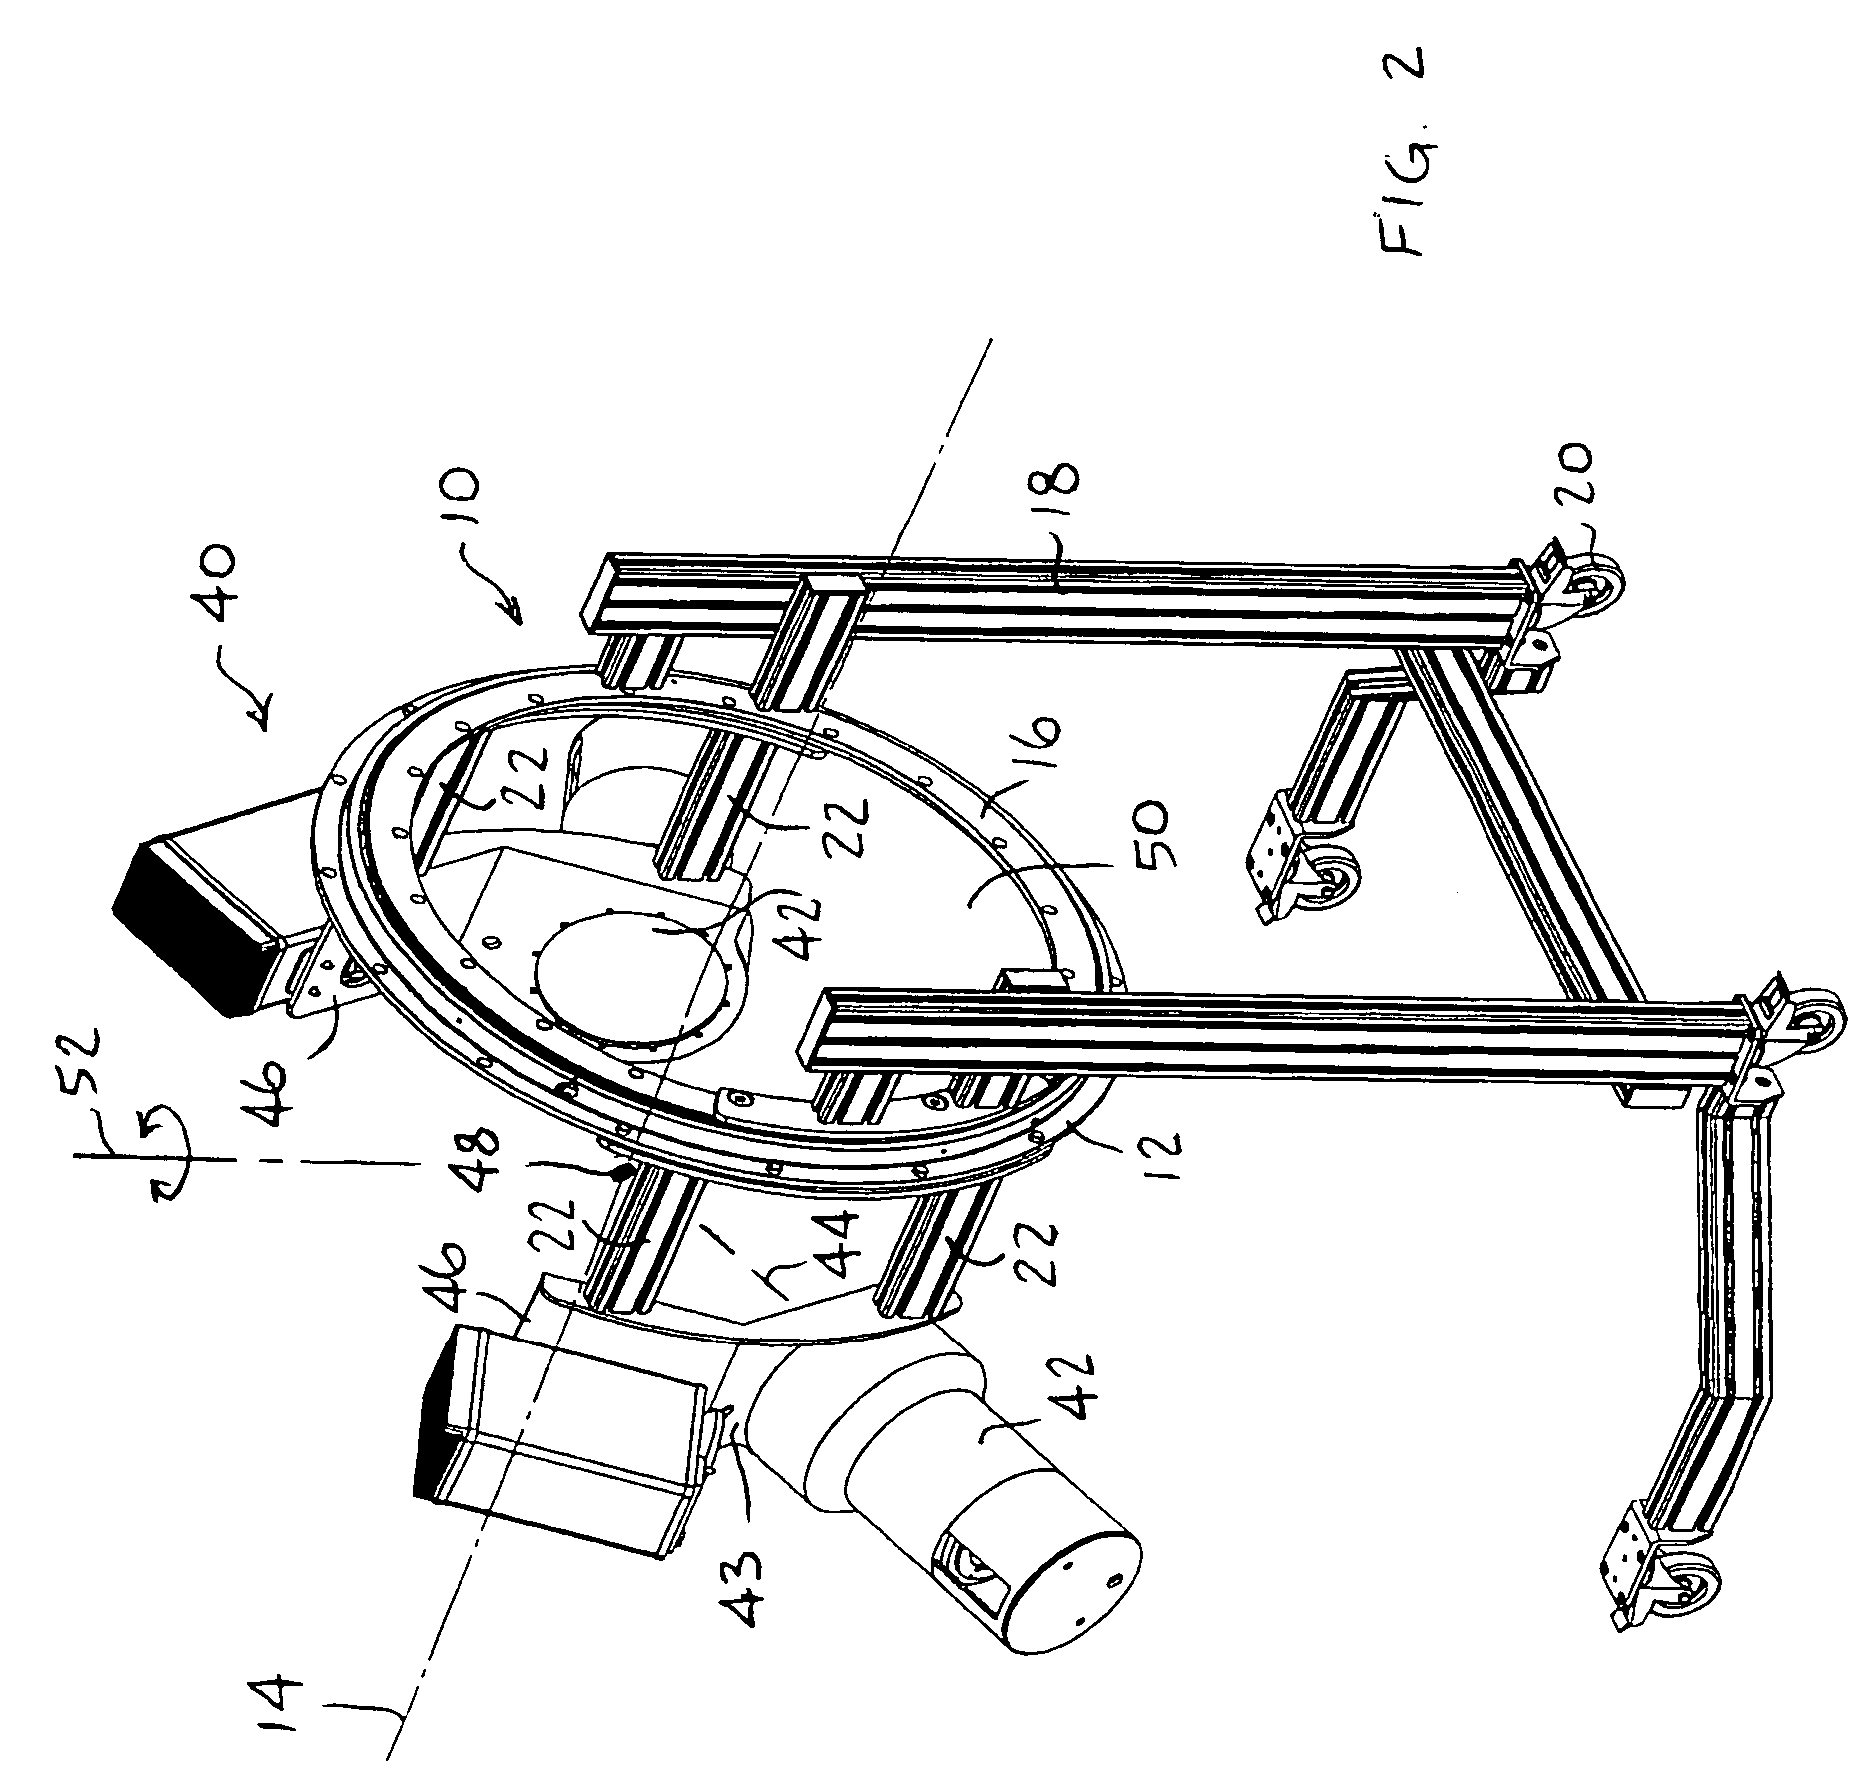 Imaging and treatment system